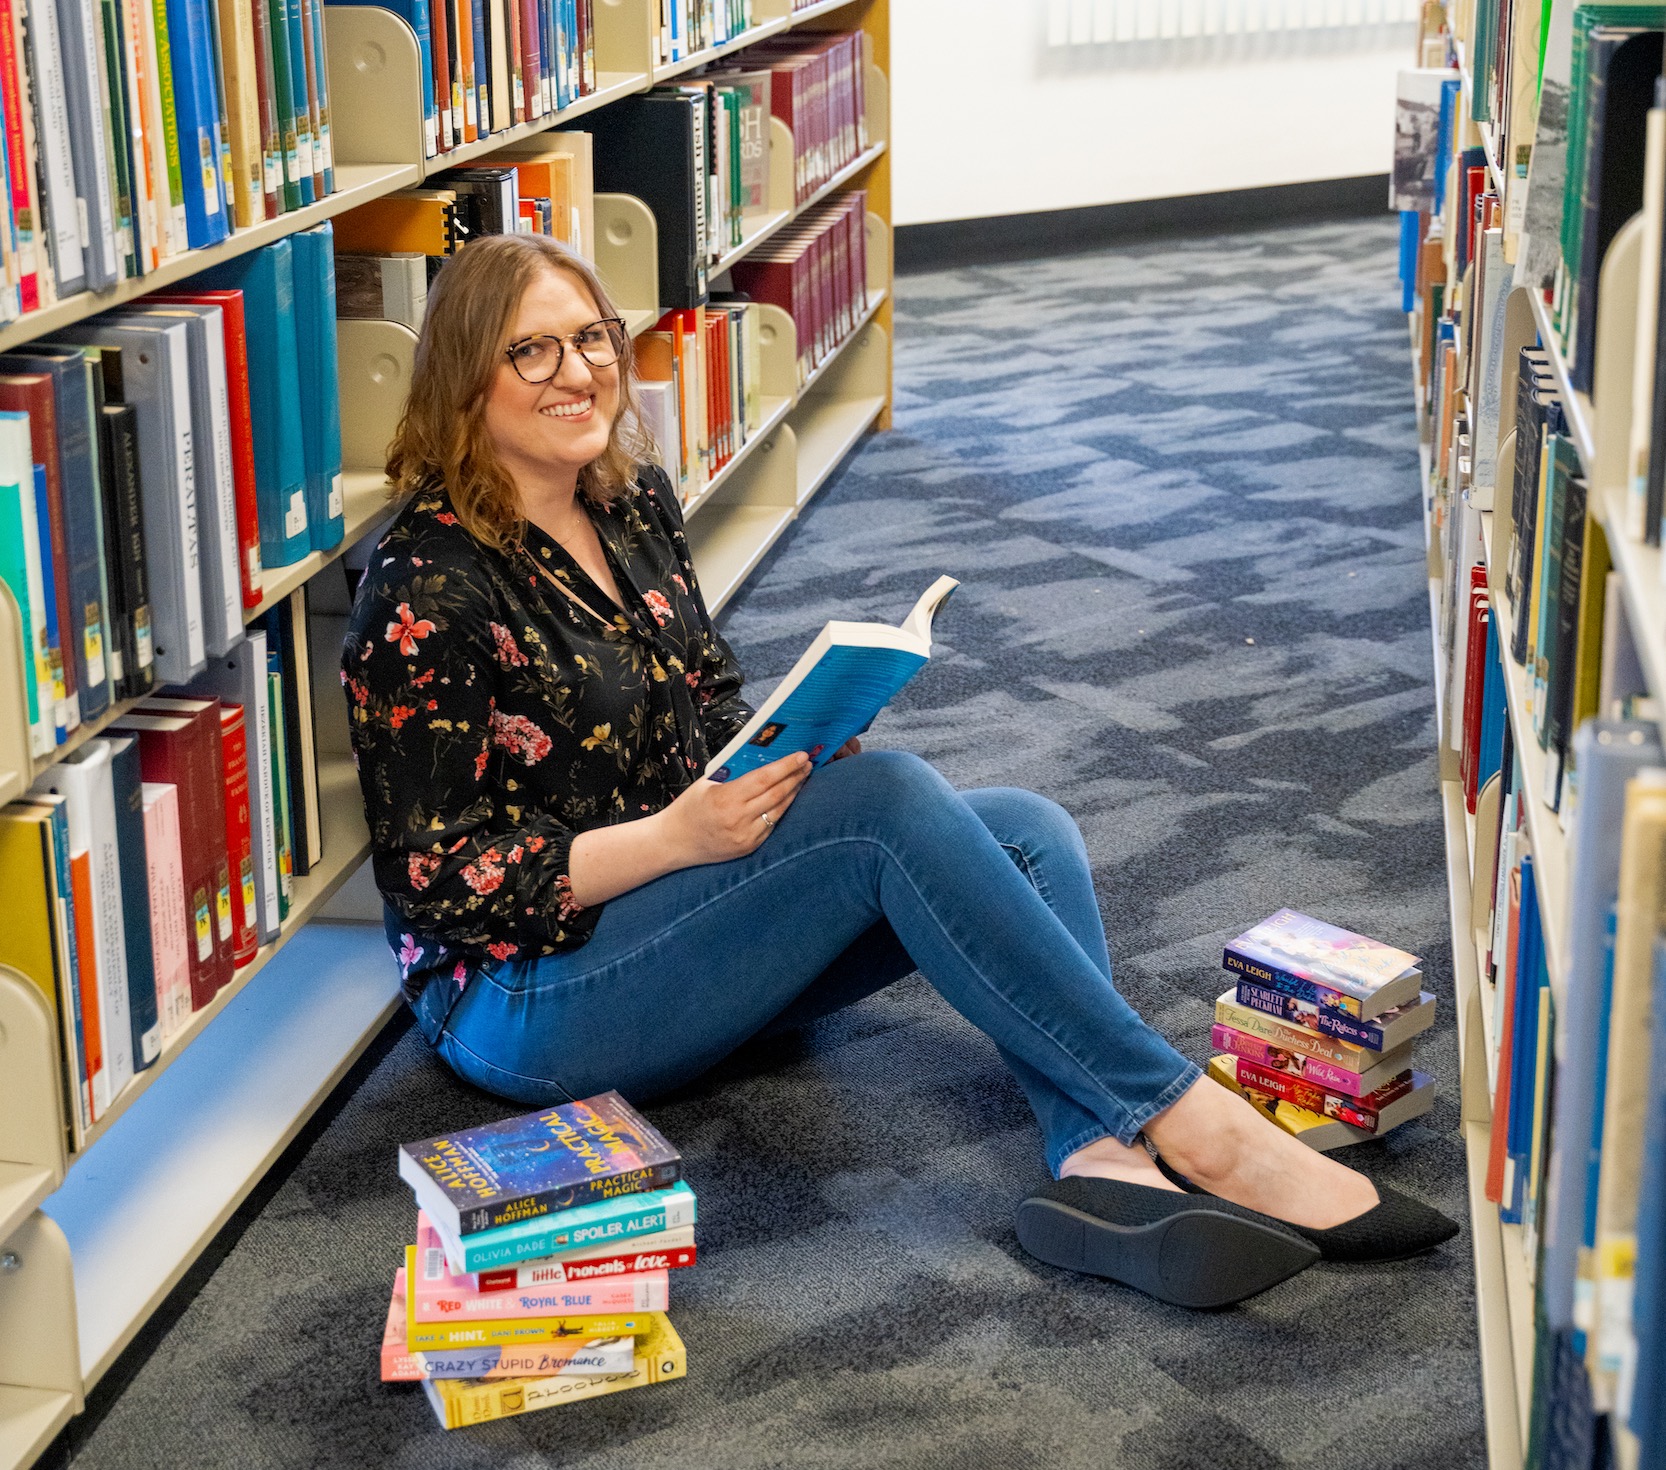 Librarian holding a book open while sitting down next to piles of books